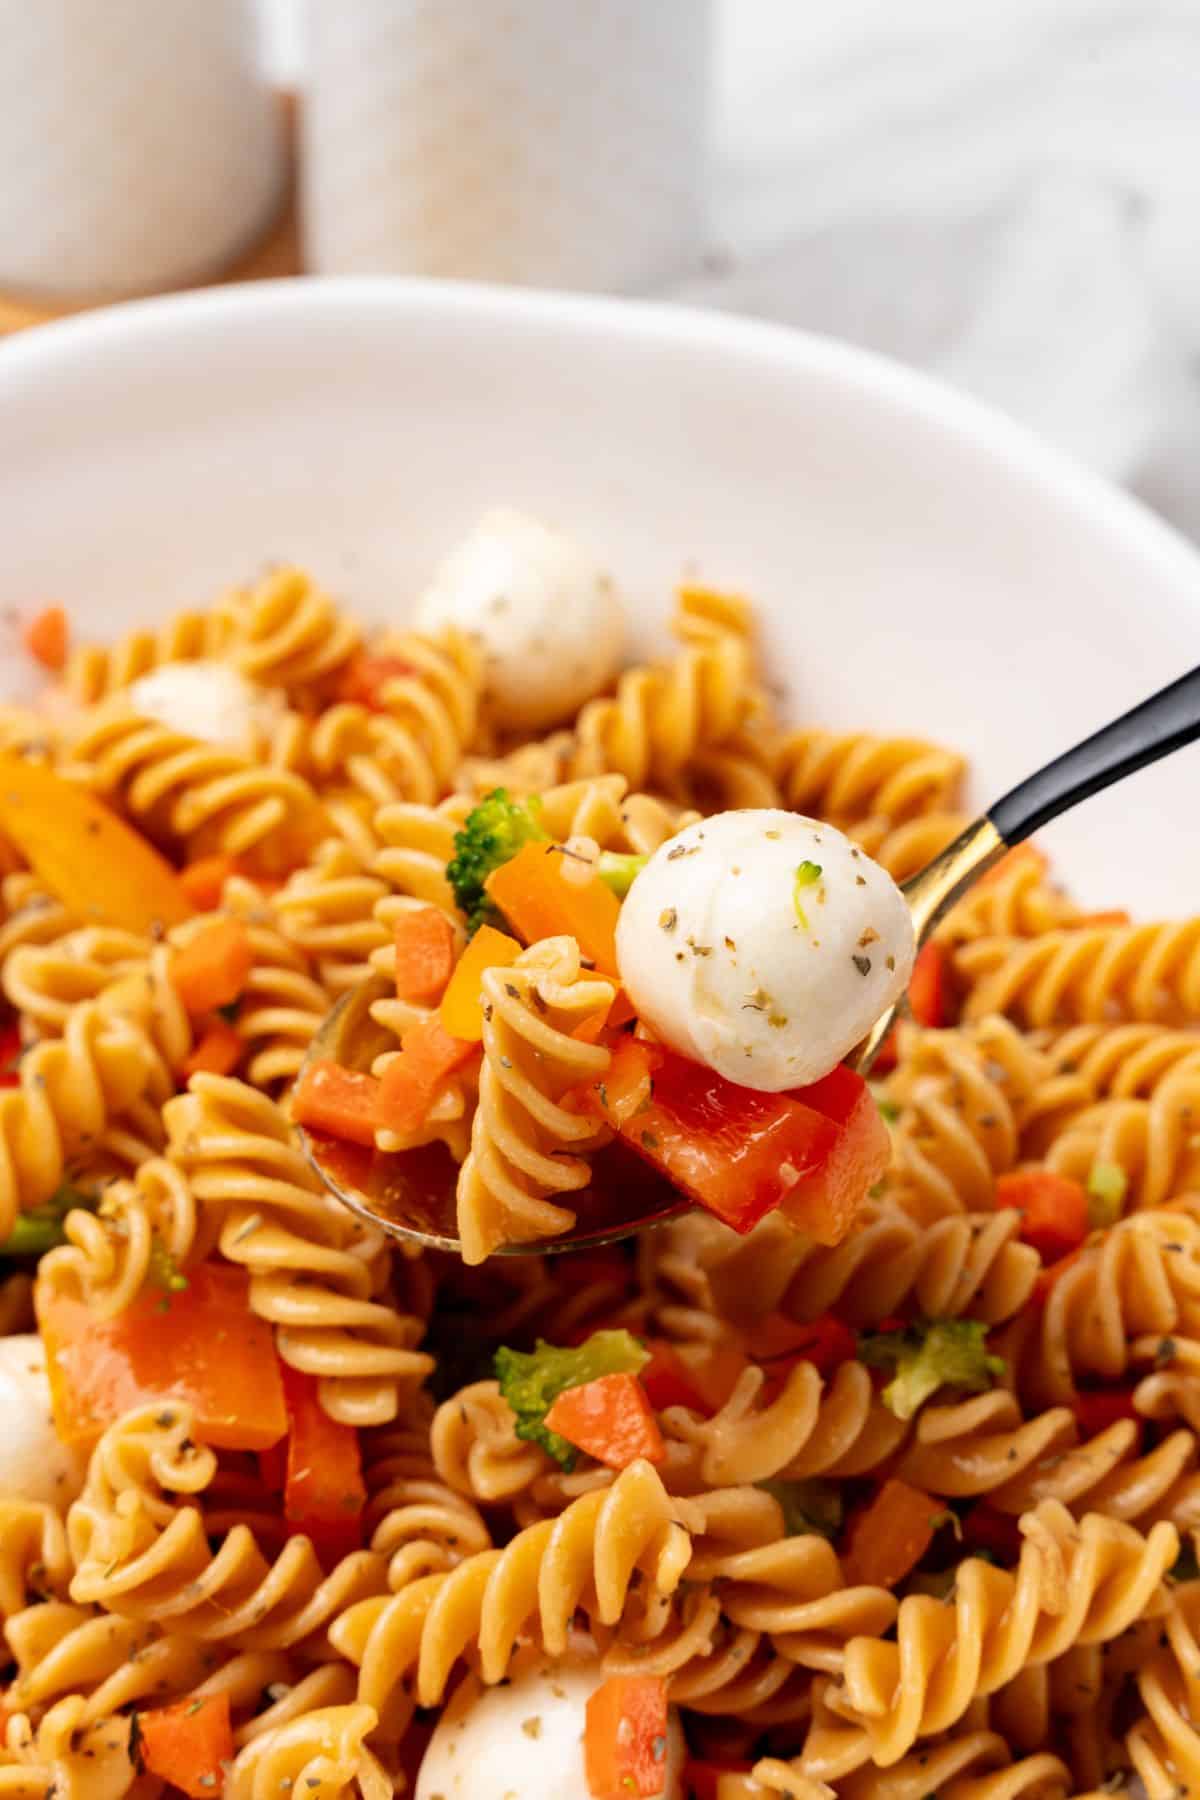 Protein-packed spoonful of pasta salad with tomatoes and mozzarella.